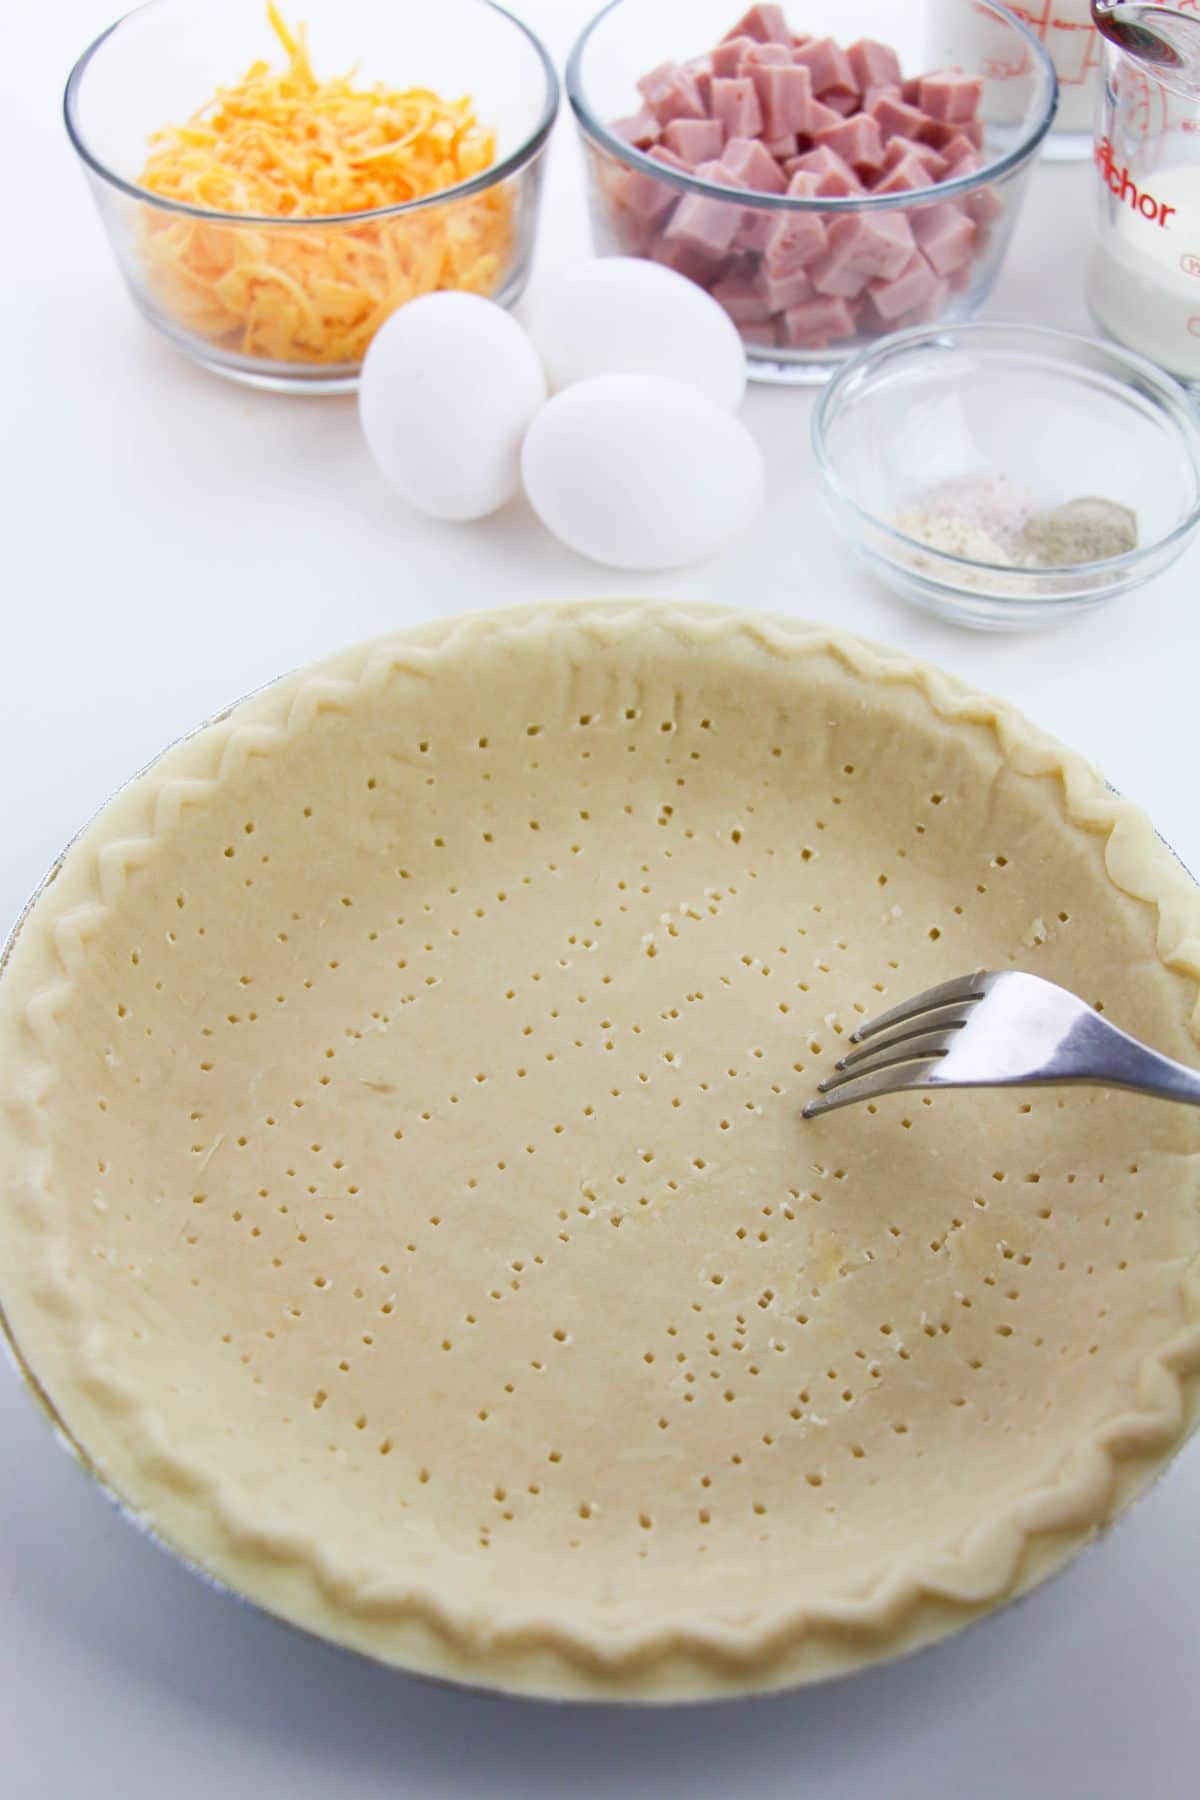 a fork being used to prick holes in a Pie crust with the other quiche ingredients in the background